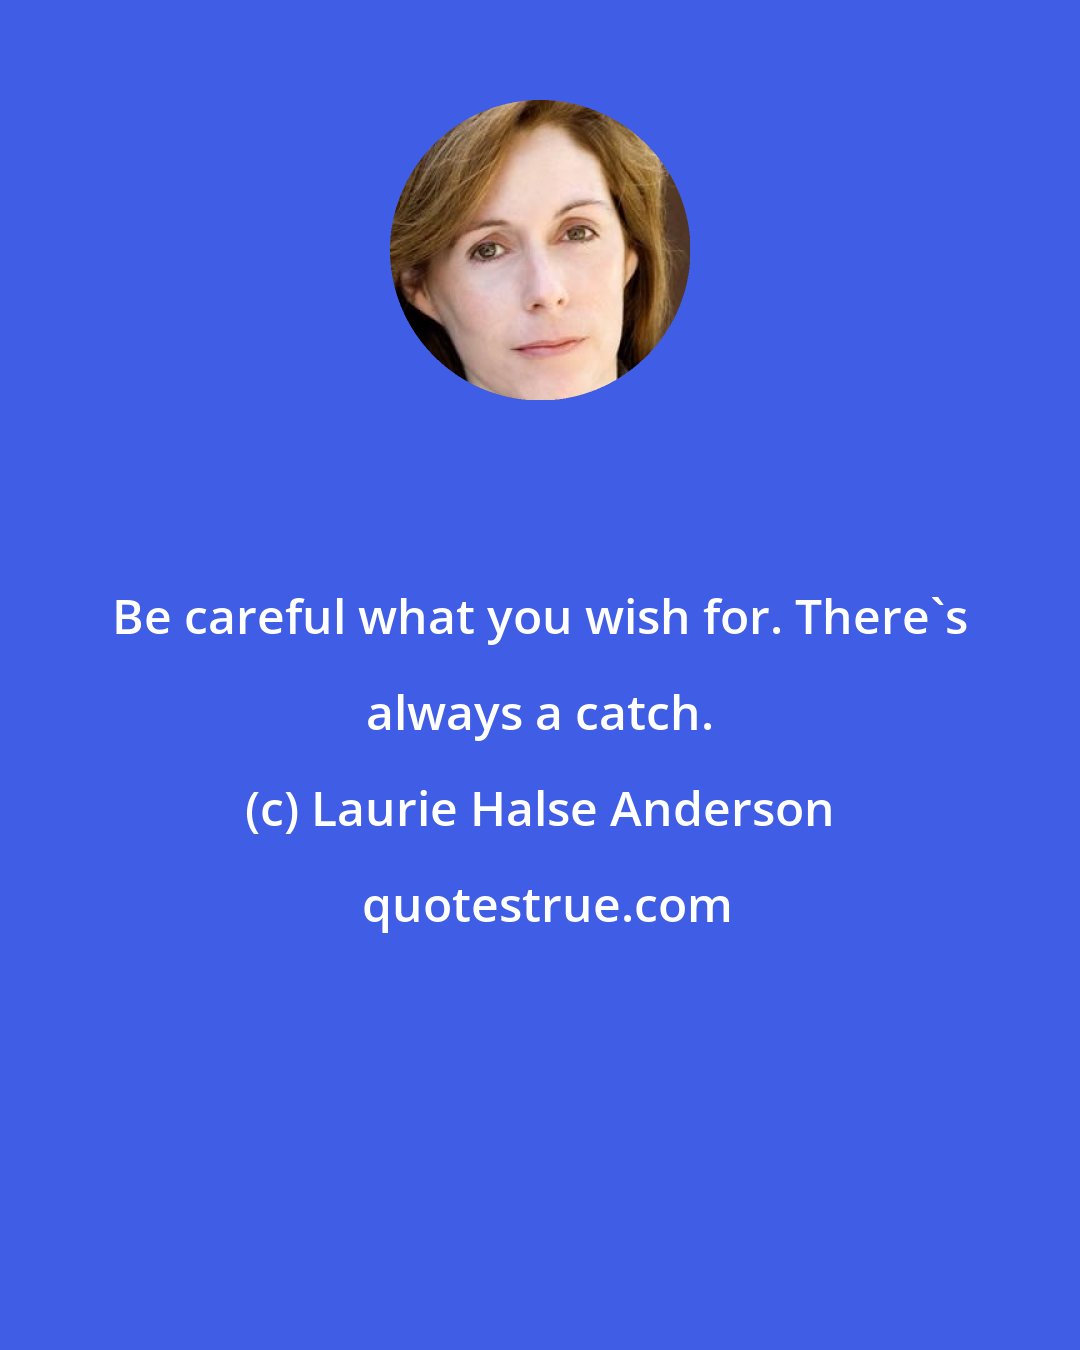 Laurie Halse Anderson: Be careful what you wish for. There's always a catch.